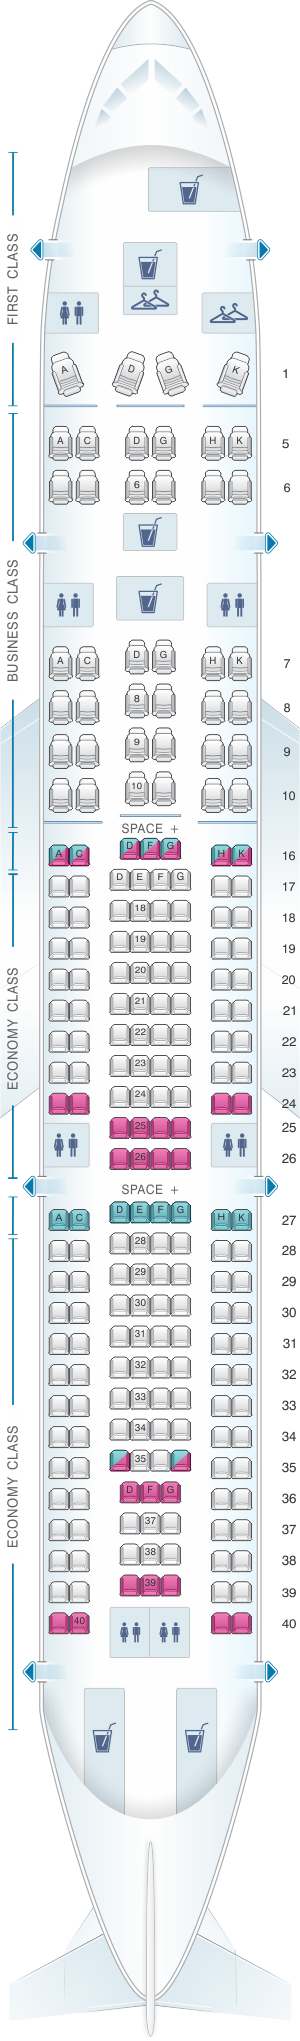 Seat map for LATAM Airlines Brasil Airbus A330 200